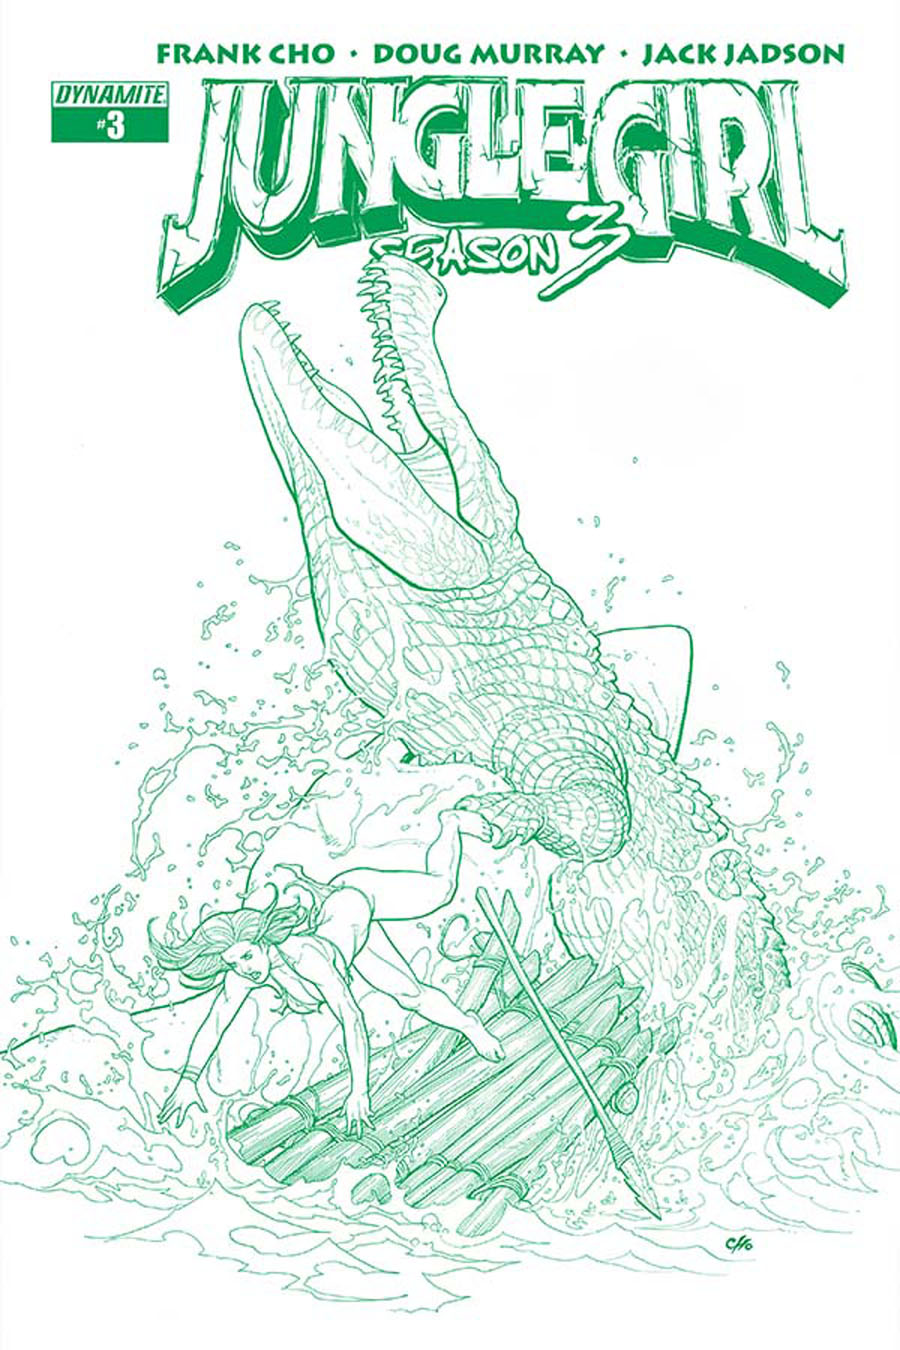 Frank Chos Jungle Girl Season 3 #3 Cover E High-End Frank Cho Jungle Green Ultra-Limited Variant Cover (ONLY 50 COPIES IN EXISTENCE!)